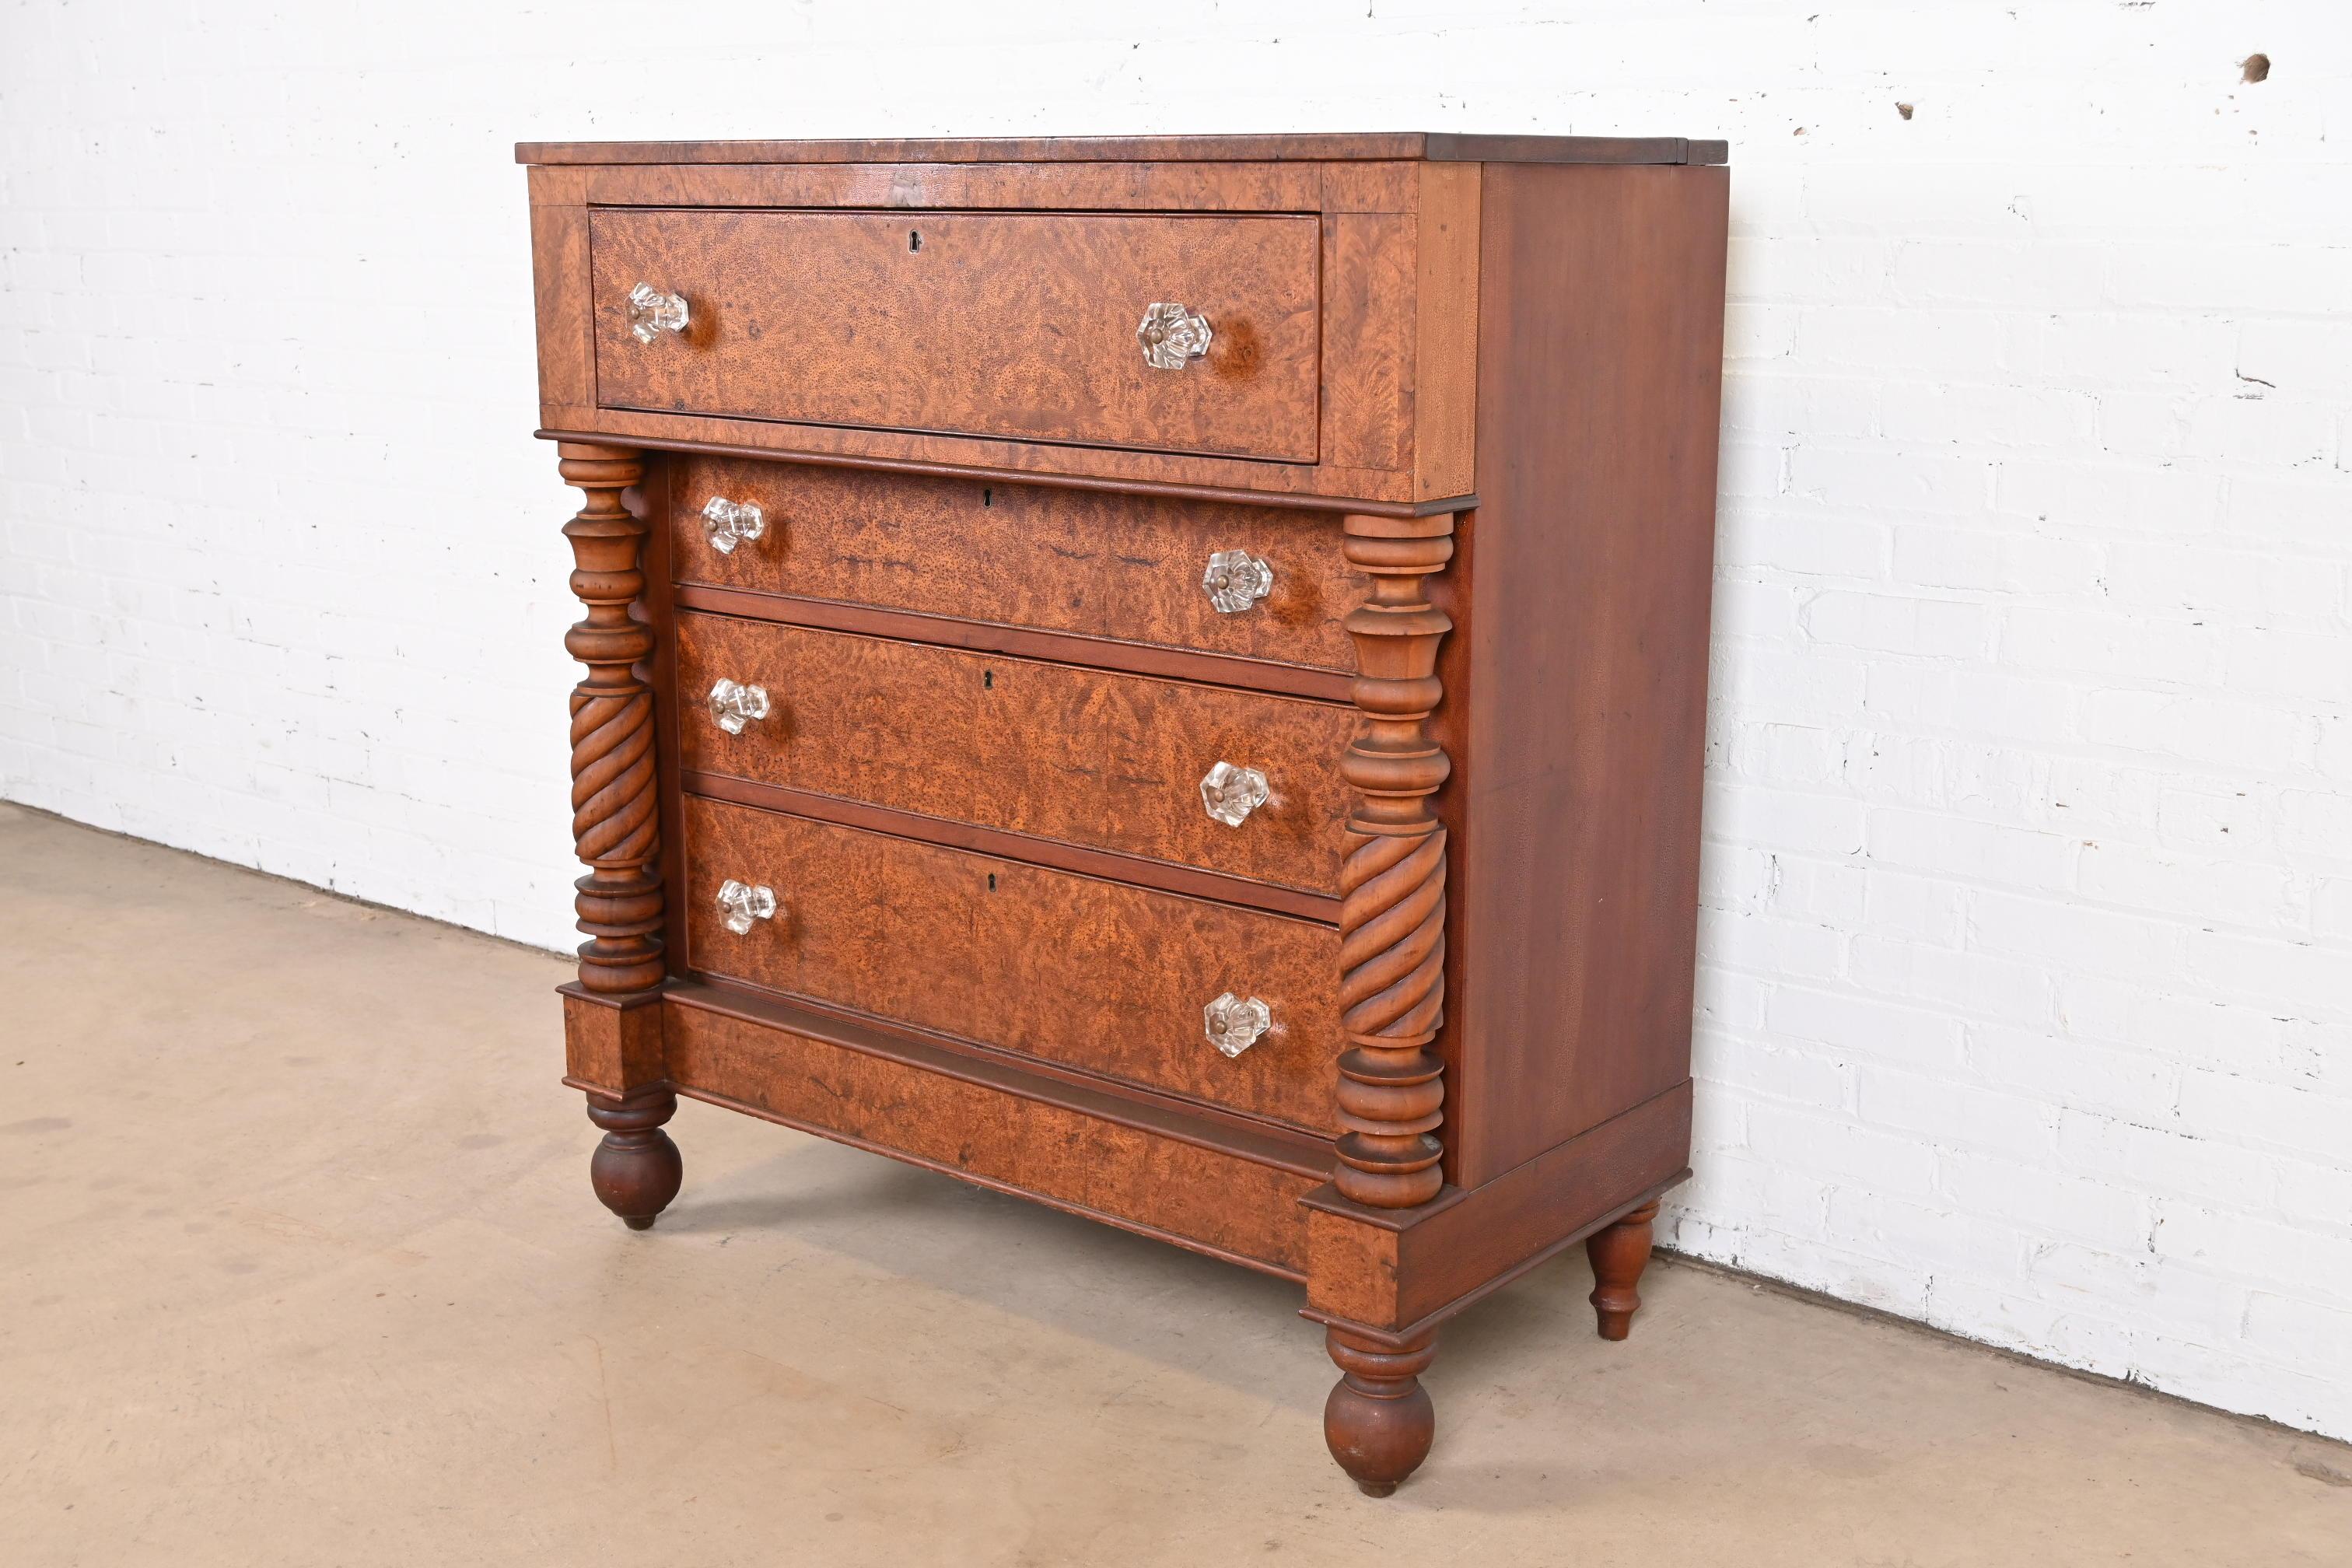 Antique American Empire Burled Mahogany Chest of Drawers, Circa 1820s For Sale 2